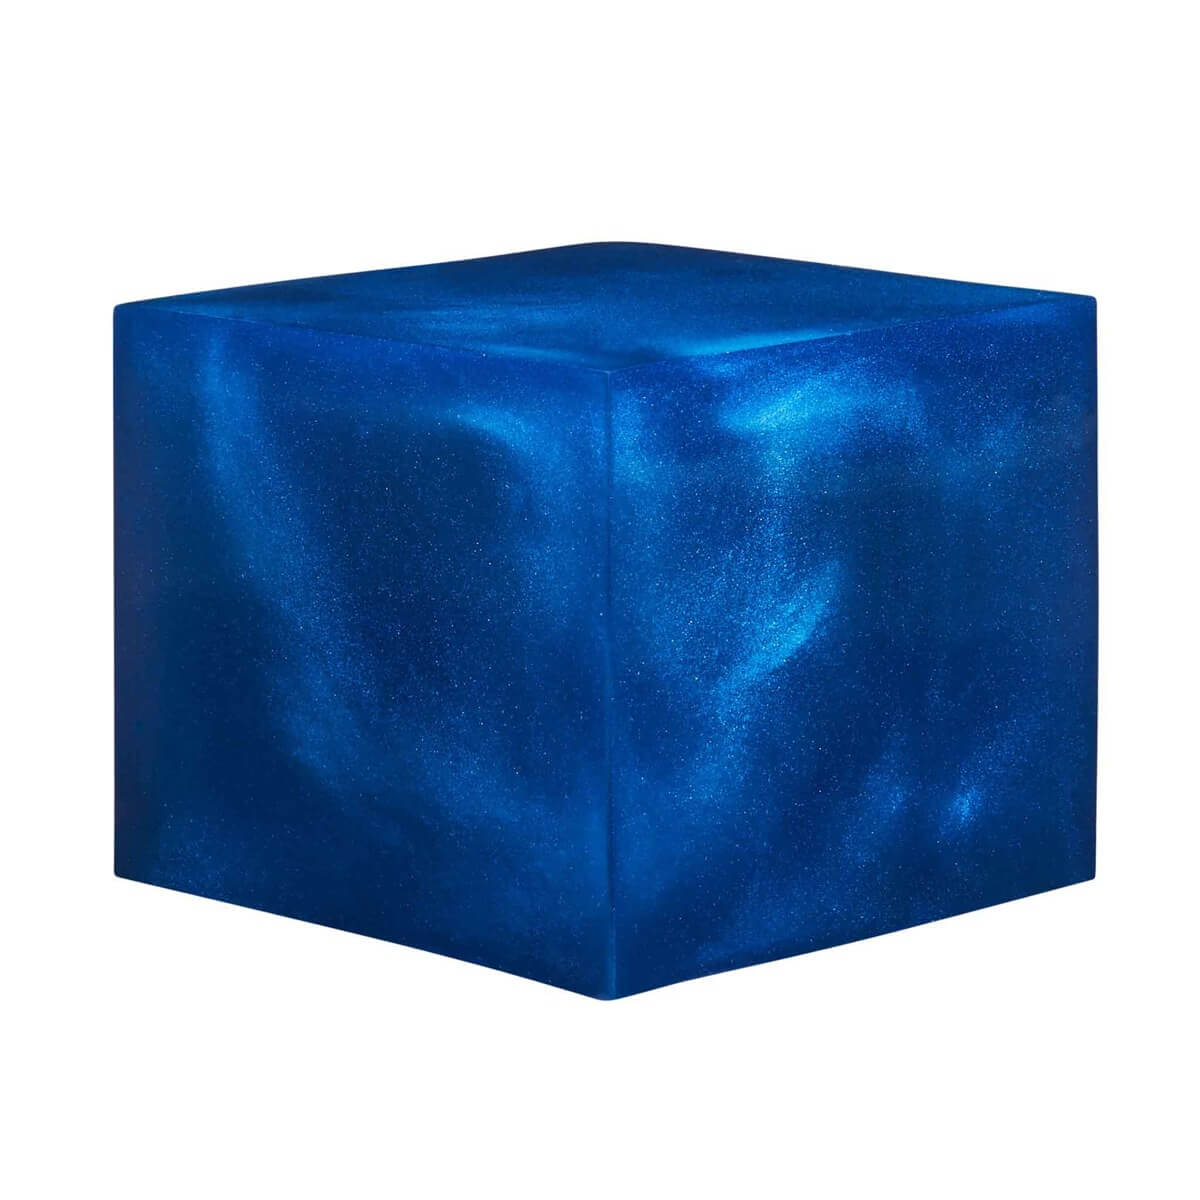 A resin cube made with the Deep Blue Wonder Mica Powder Pigment by Pigmently.